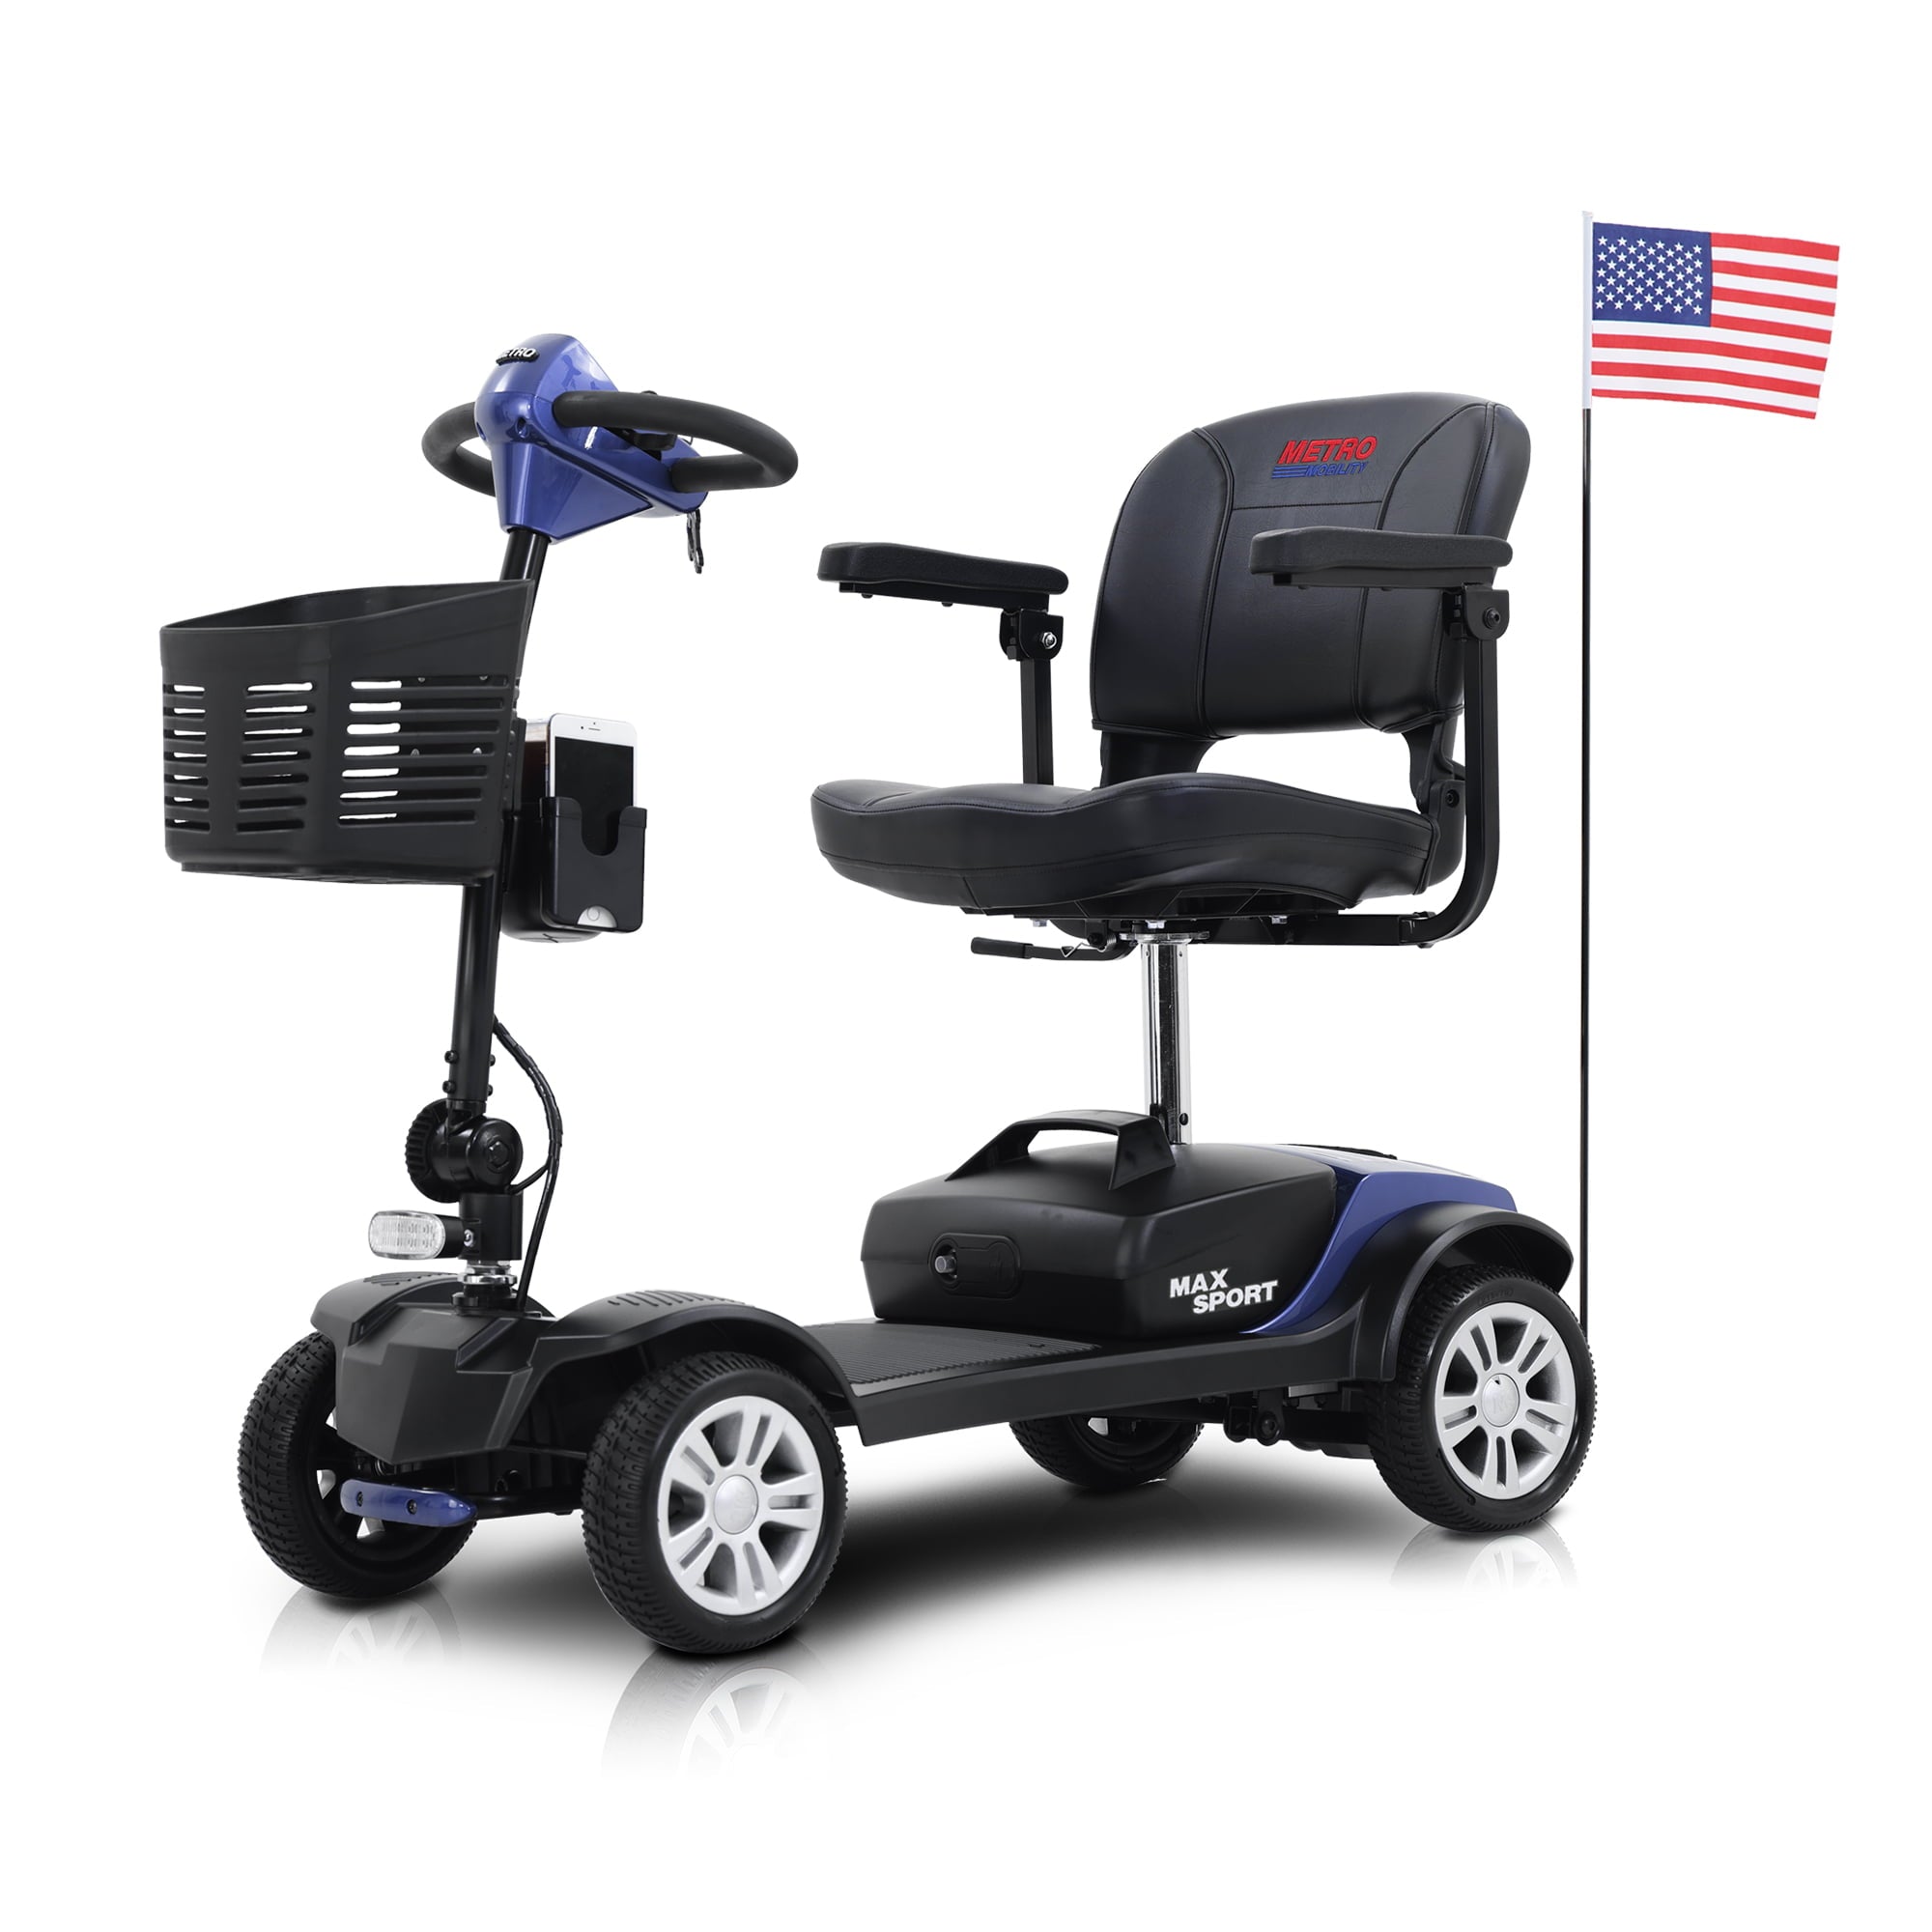 SPORT BLUE 4 Wheels Outdoor Compact Mobility Scooter with 2 in 1 Cup & Phone Holder